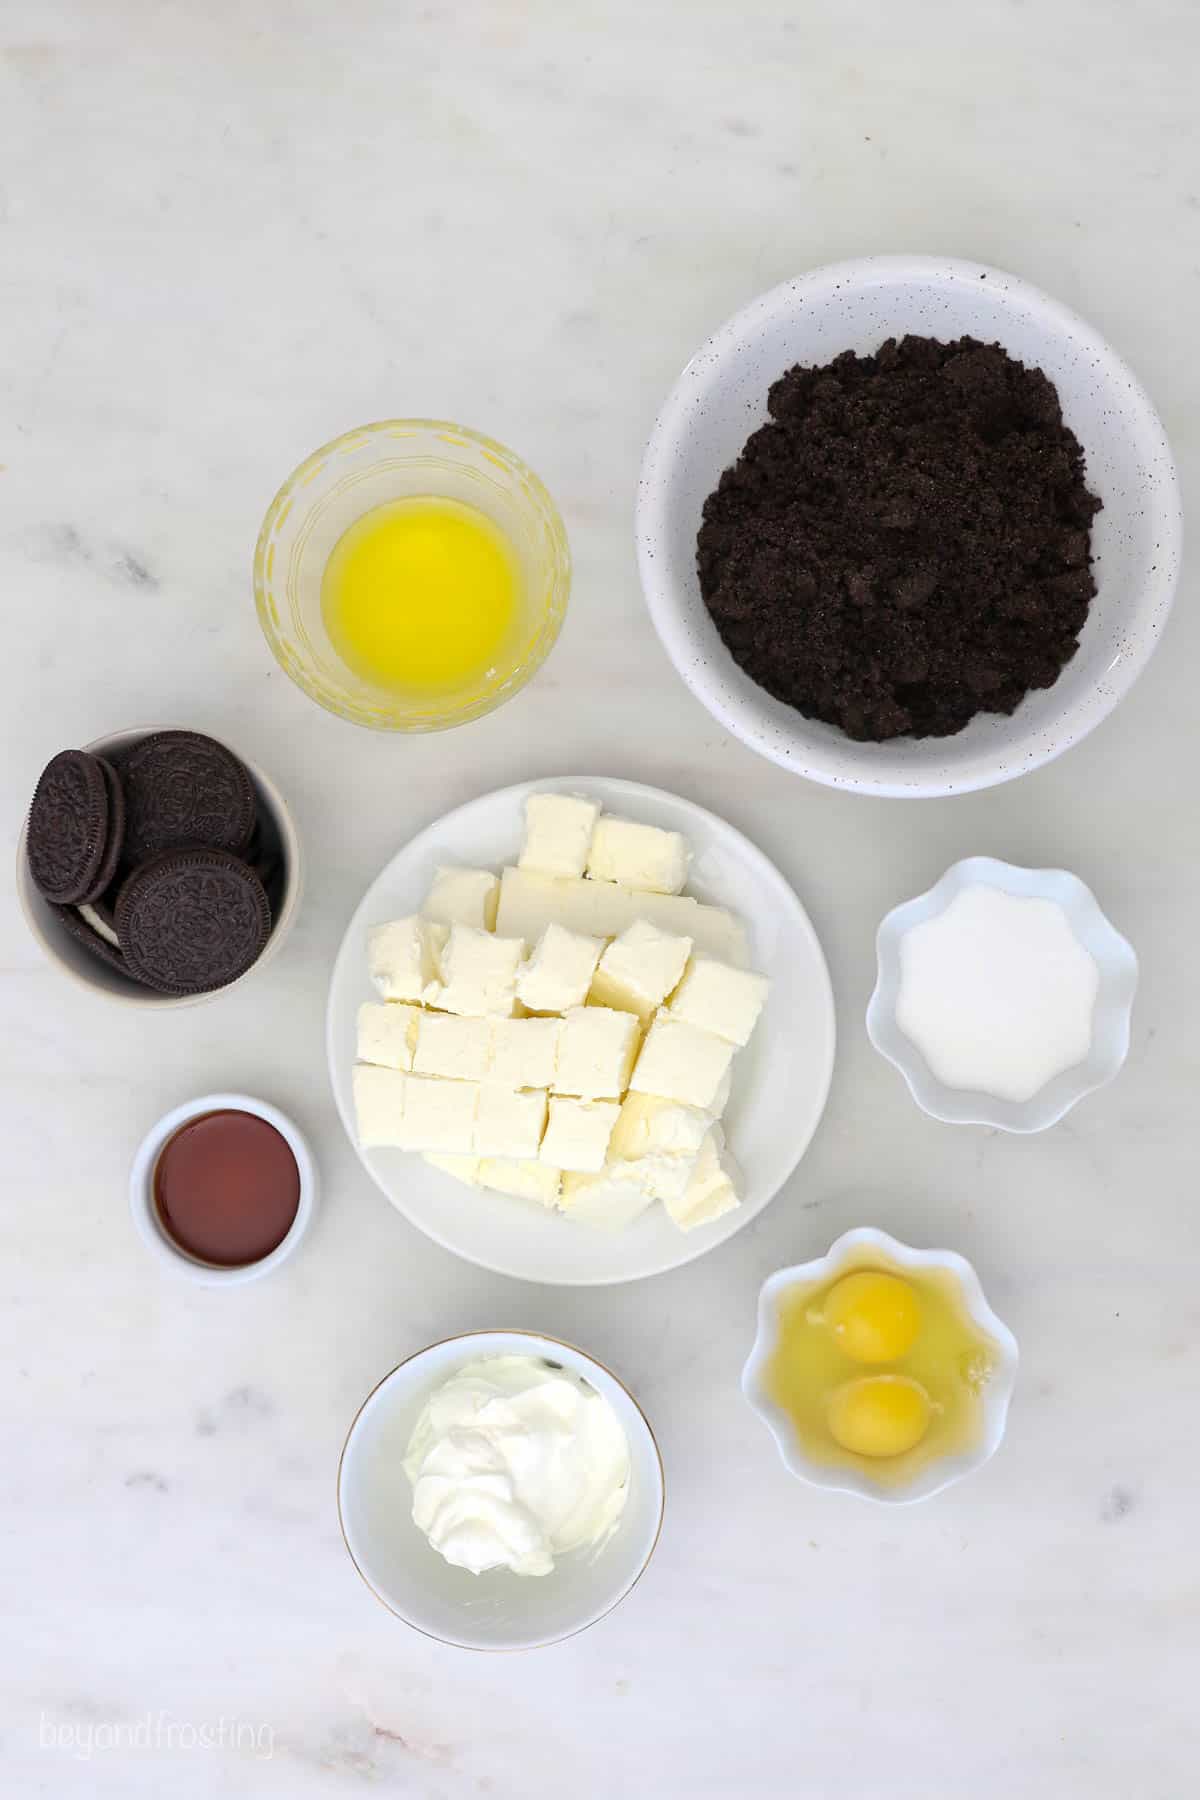 Eggs, butter, granulated sugar and the rest of the ingredients in small bowls on a kitchen countertop